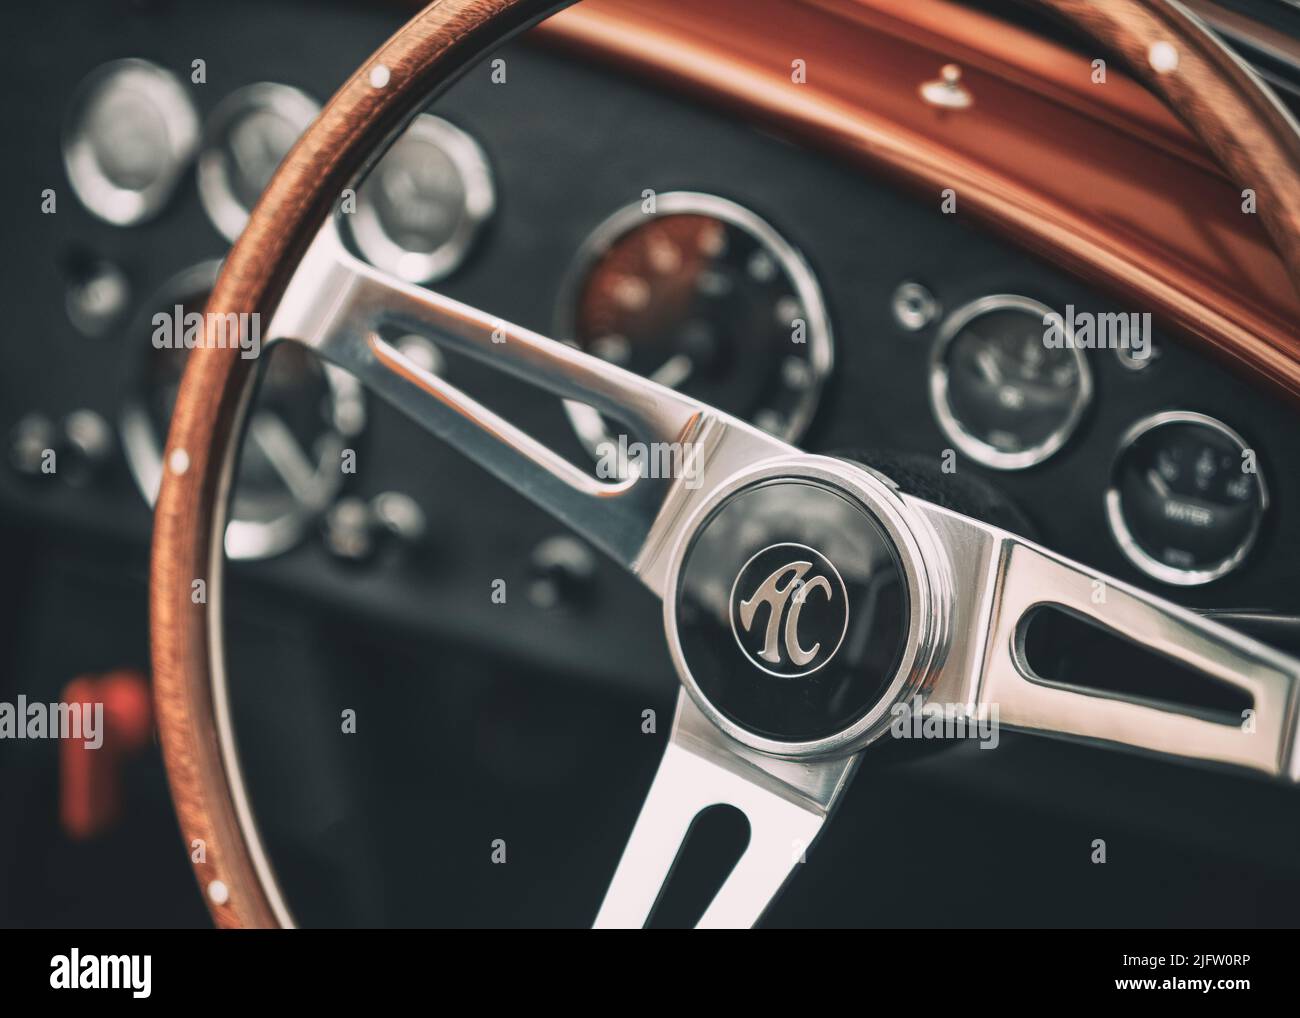 The steering wheel and dashboard section of a red AC Cobra classic sports car Stock Photo